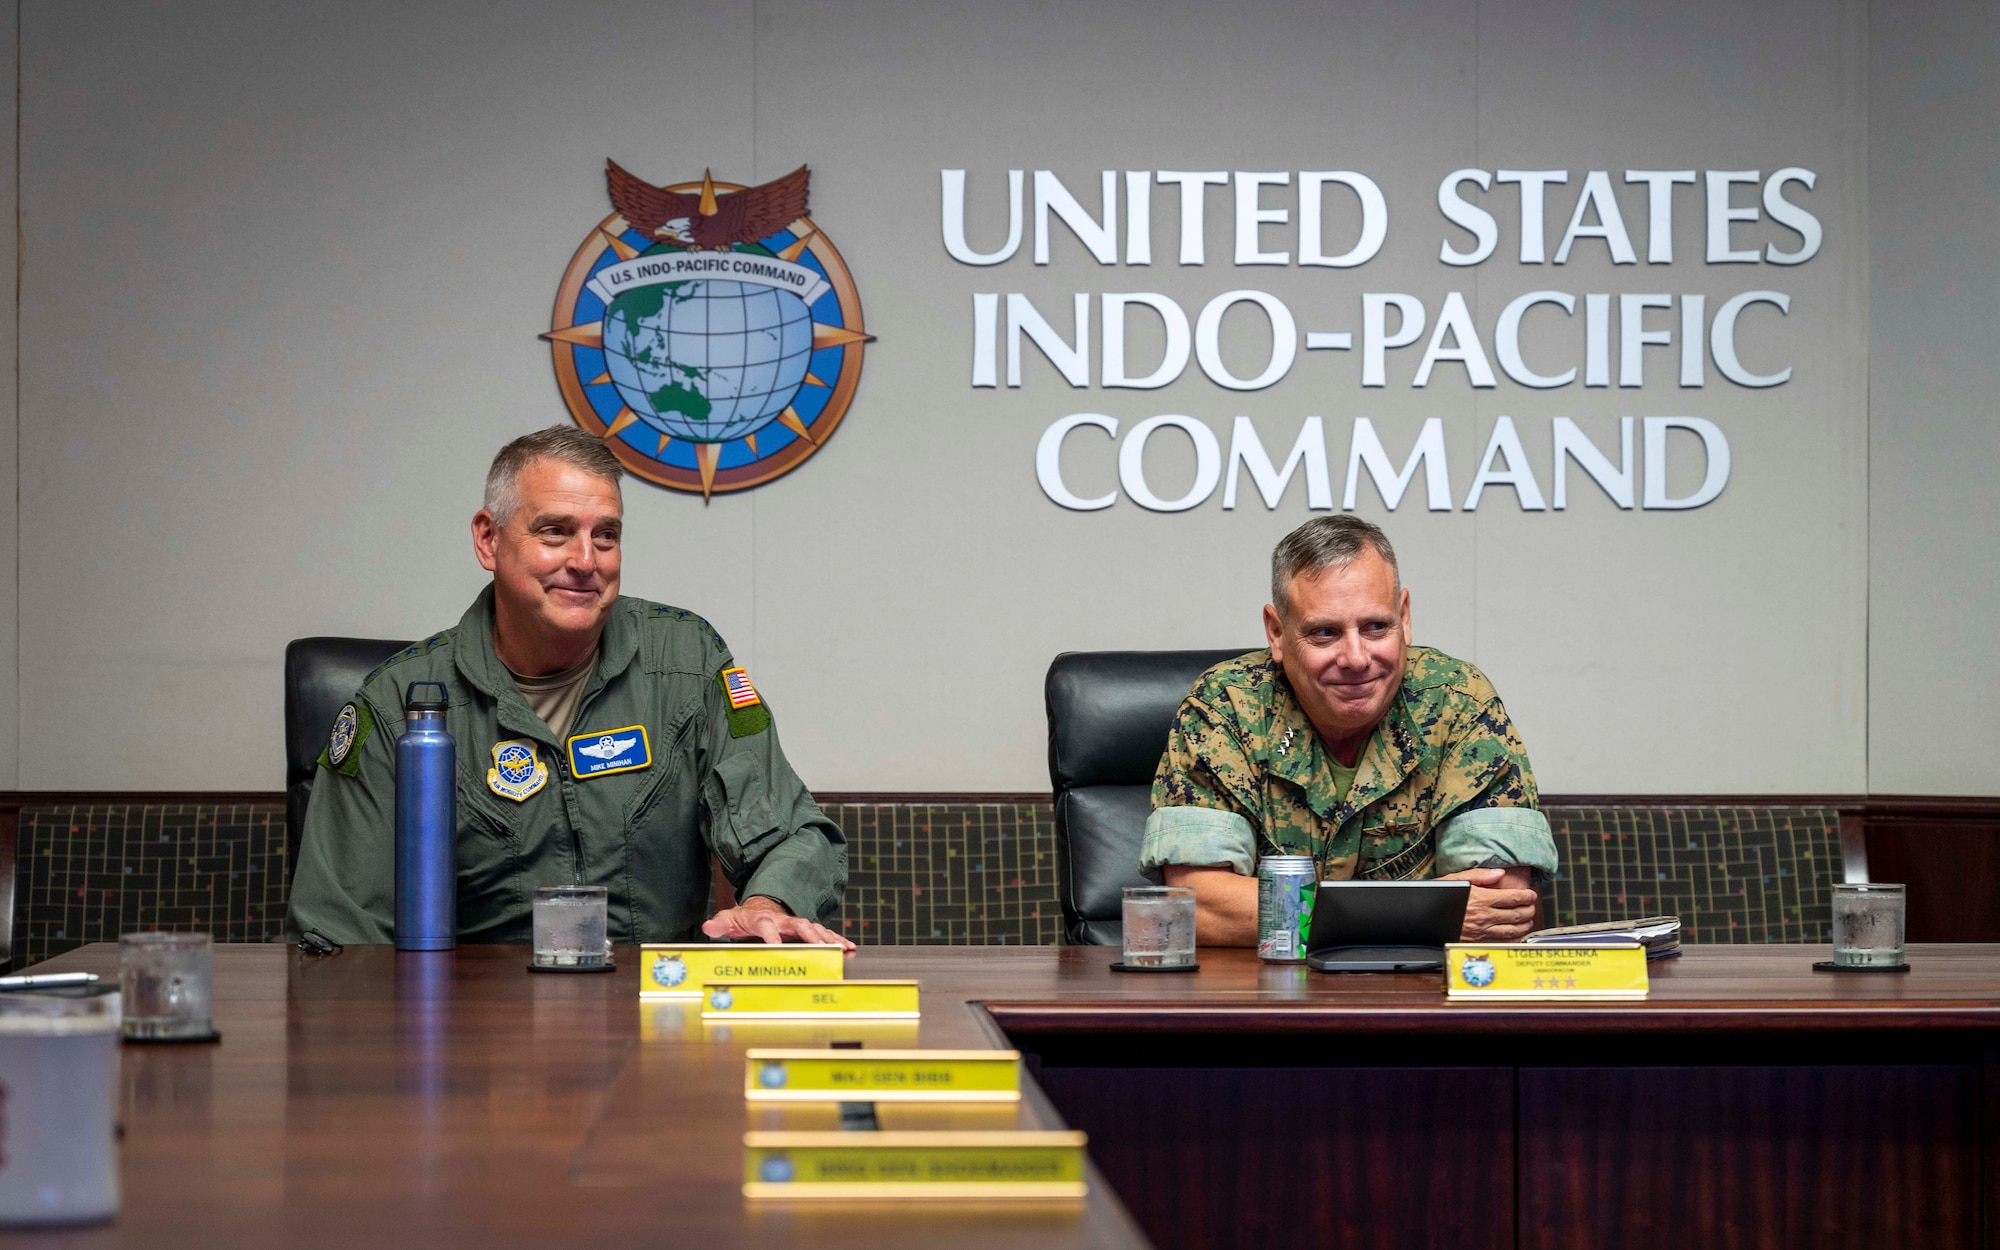 CAMP H.M. SMITH, Hawaii (June 23, 2022) Gen. Michael Minihan, Commander of Air Mobility Command, left, and Lt. Gen. Stephen D. Sklenka, Deputy Commander of U.S. Indo-Pacific Command, attend a meeting during a visit to USINDOPACOM headquarters. AMC leaders met with USINDOPACOM as well as their Pacific Air Forces counterparts to present a road map for readying Mobility Air Forces for Agile Combat Employment in the Indo-Pacific theater. (U.S. Navy photo by Mass Communication Specialist 1st Class Anthony J. Rivera)